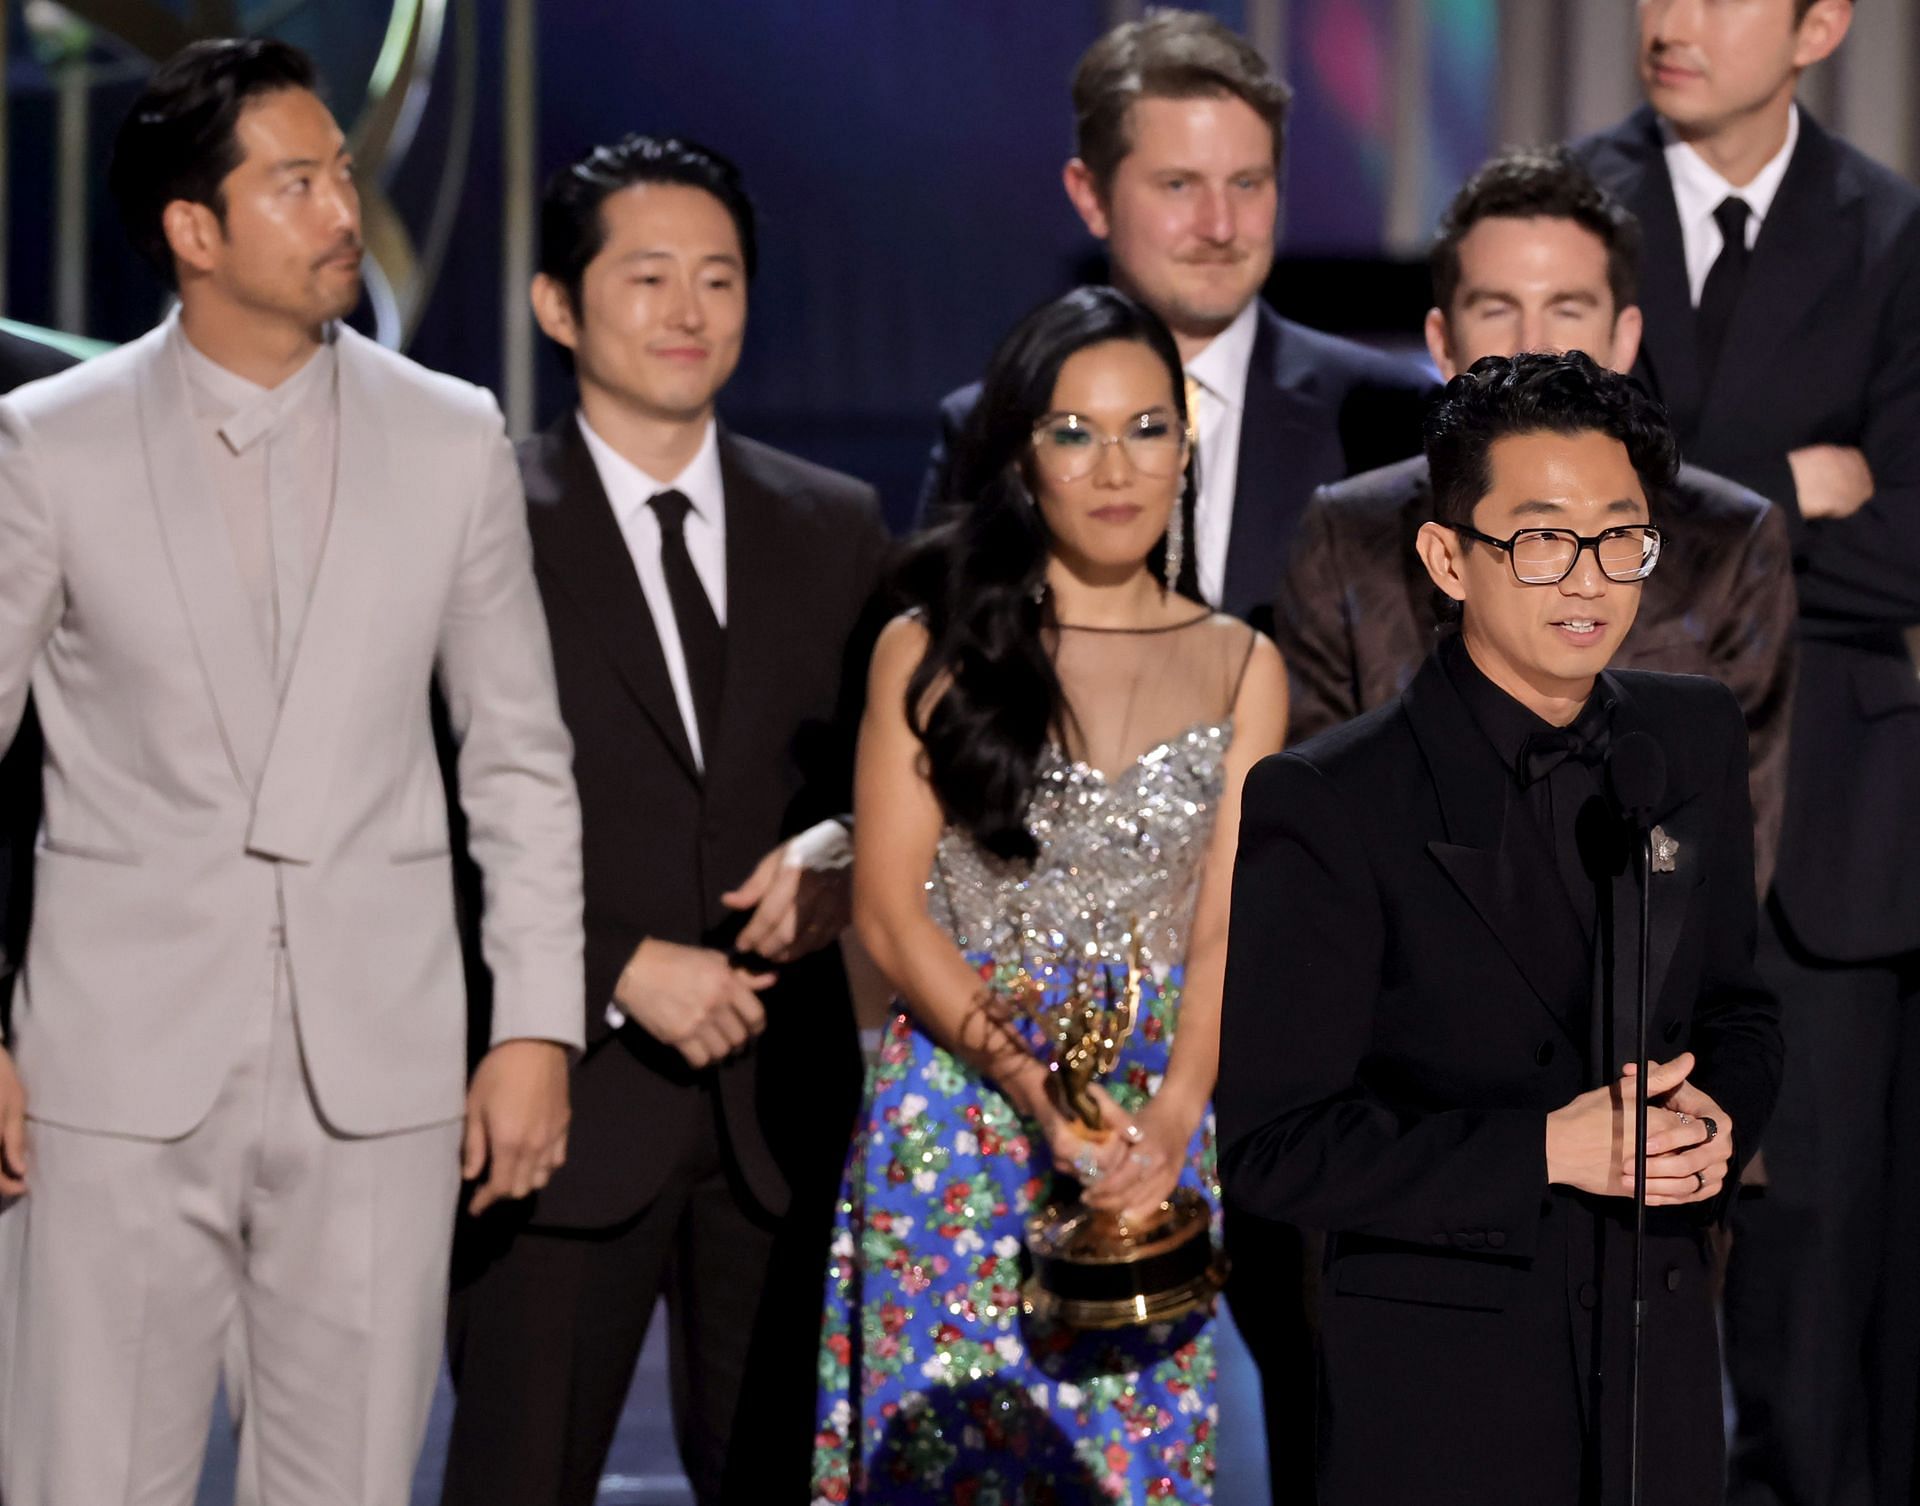 The cast and crew of Beef at the 75th Primetime Emmy Awards (Image via Getty Images)